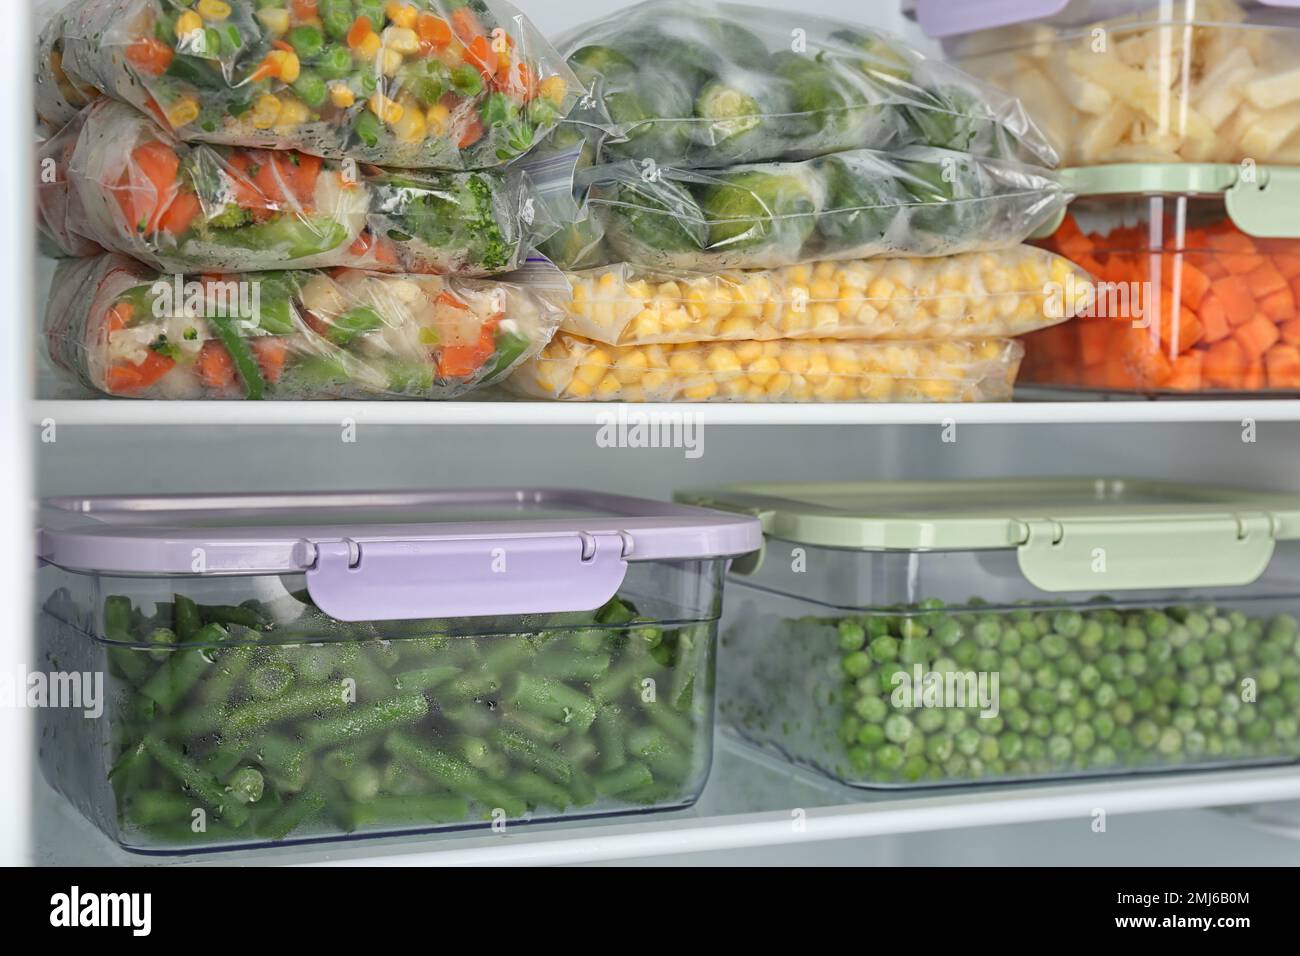 https://c8.alamy.com/comp/2MJ6B0M/plastic-bags-and-containers-with-different-frozen-vegetables-in-refrigerator-2MJ6B0M.jpg